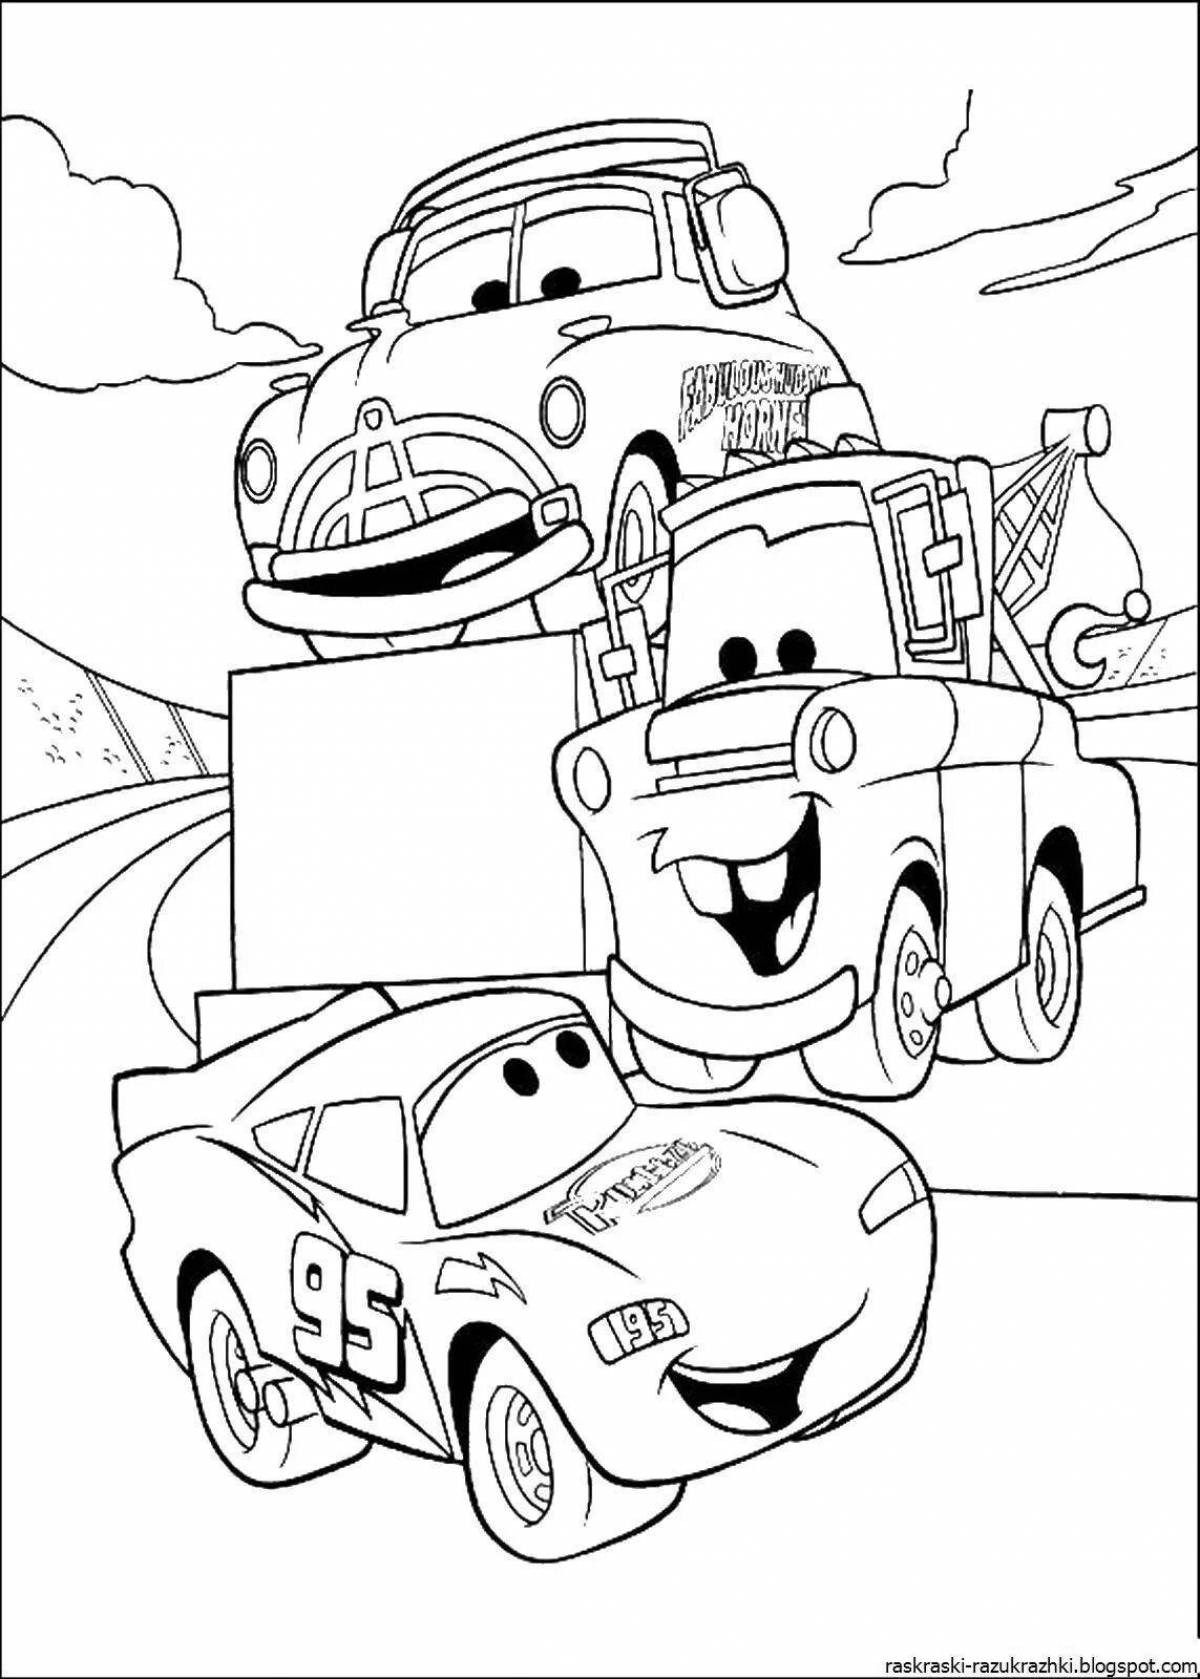 Incredible cars coloring book for 6-7 year olds